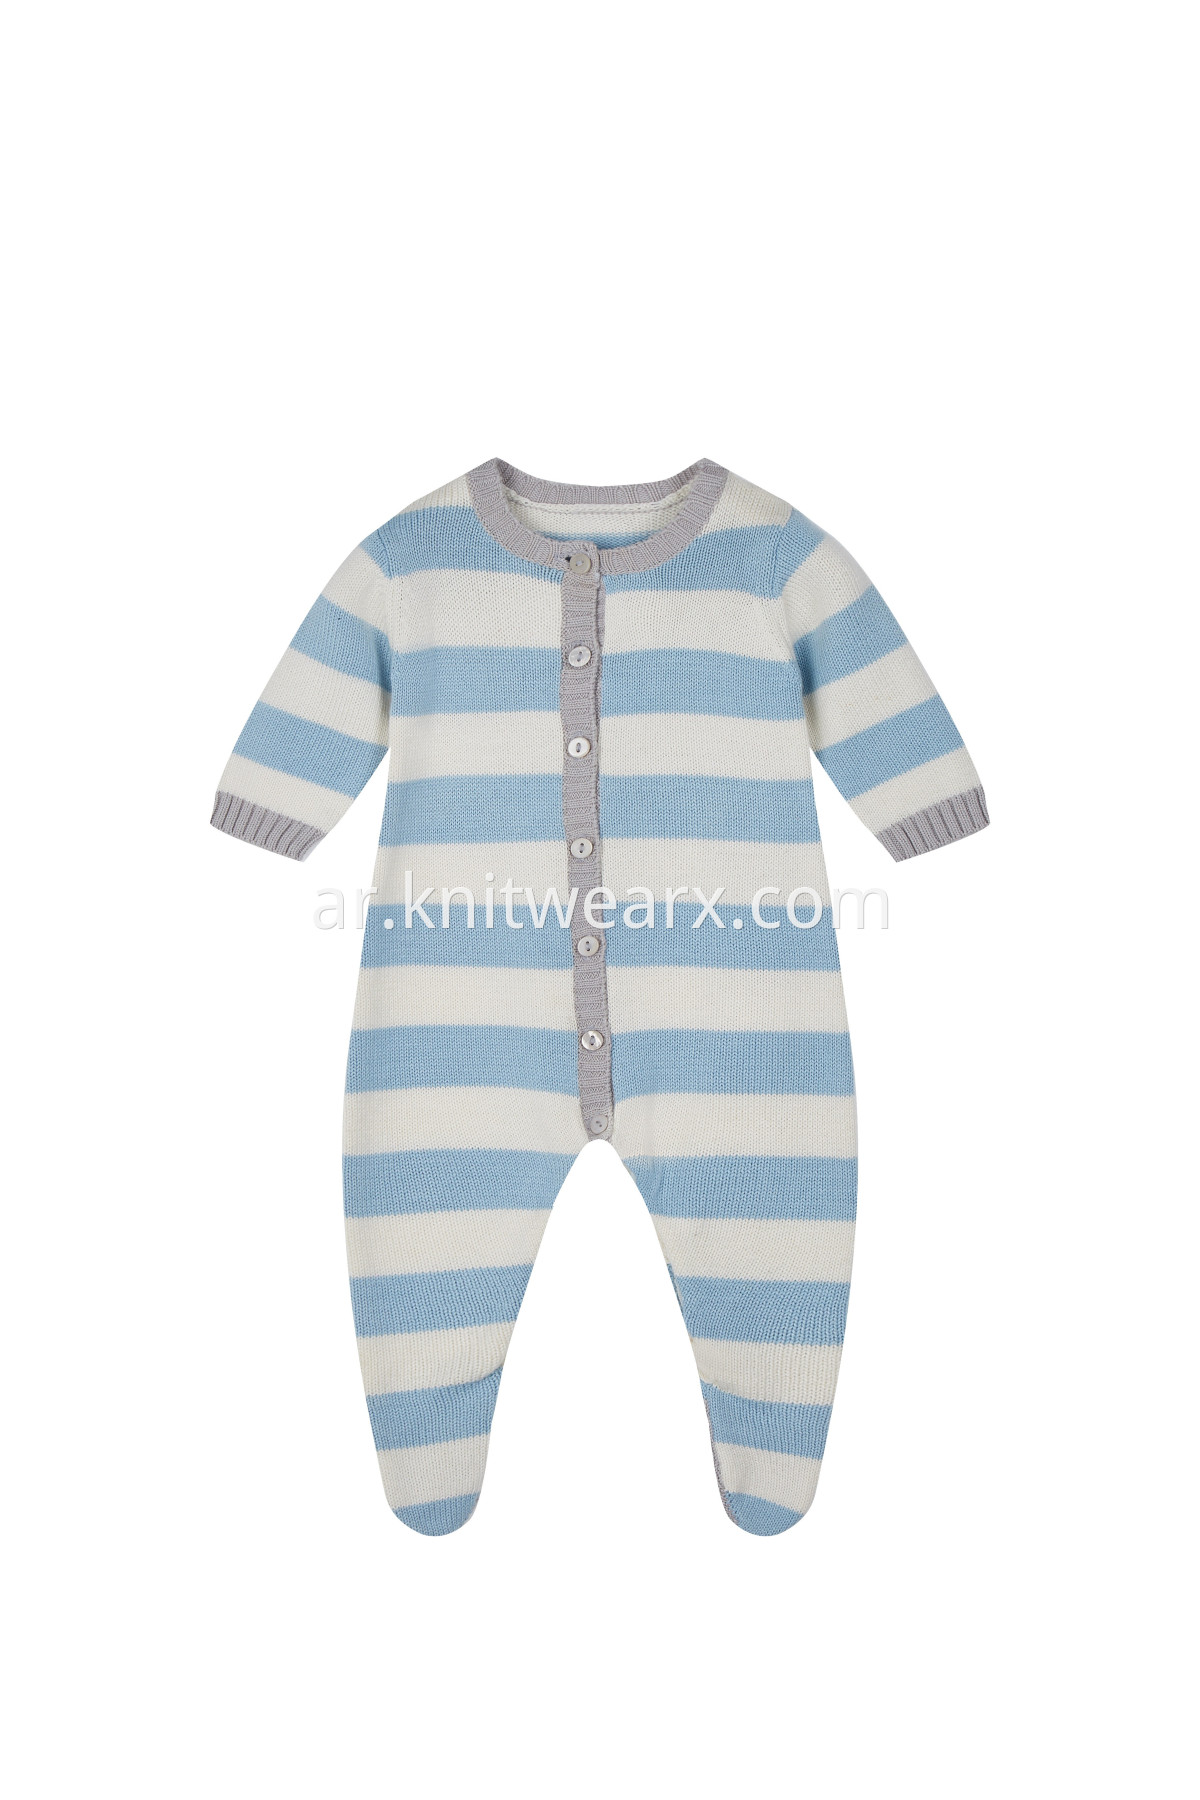 Baby's Lightweight Footed Pajamas Button Closure Crew Neck Sweater